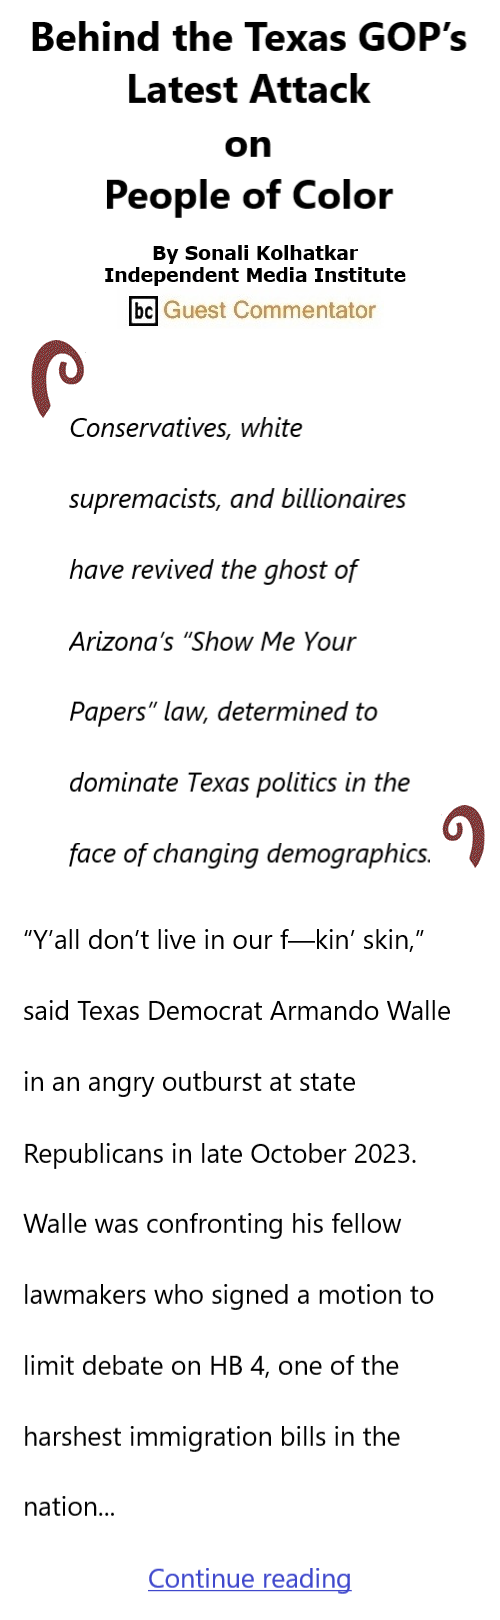 BlackCommentator.com Nov 2, 2023 - Issue 976: Behind the Texas GOP’s Latest Attack on People of Color By Sonali Kolhatkar, Independent Media Institute, BC Guest Commentator